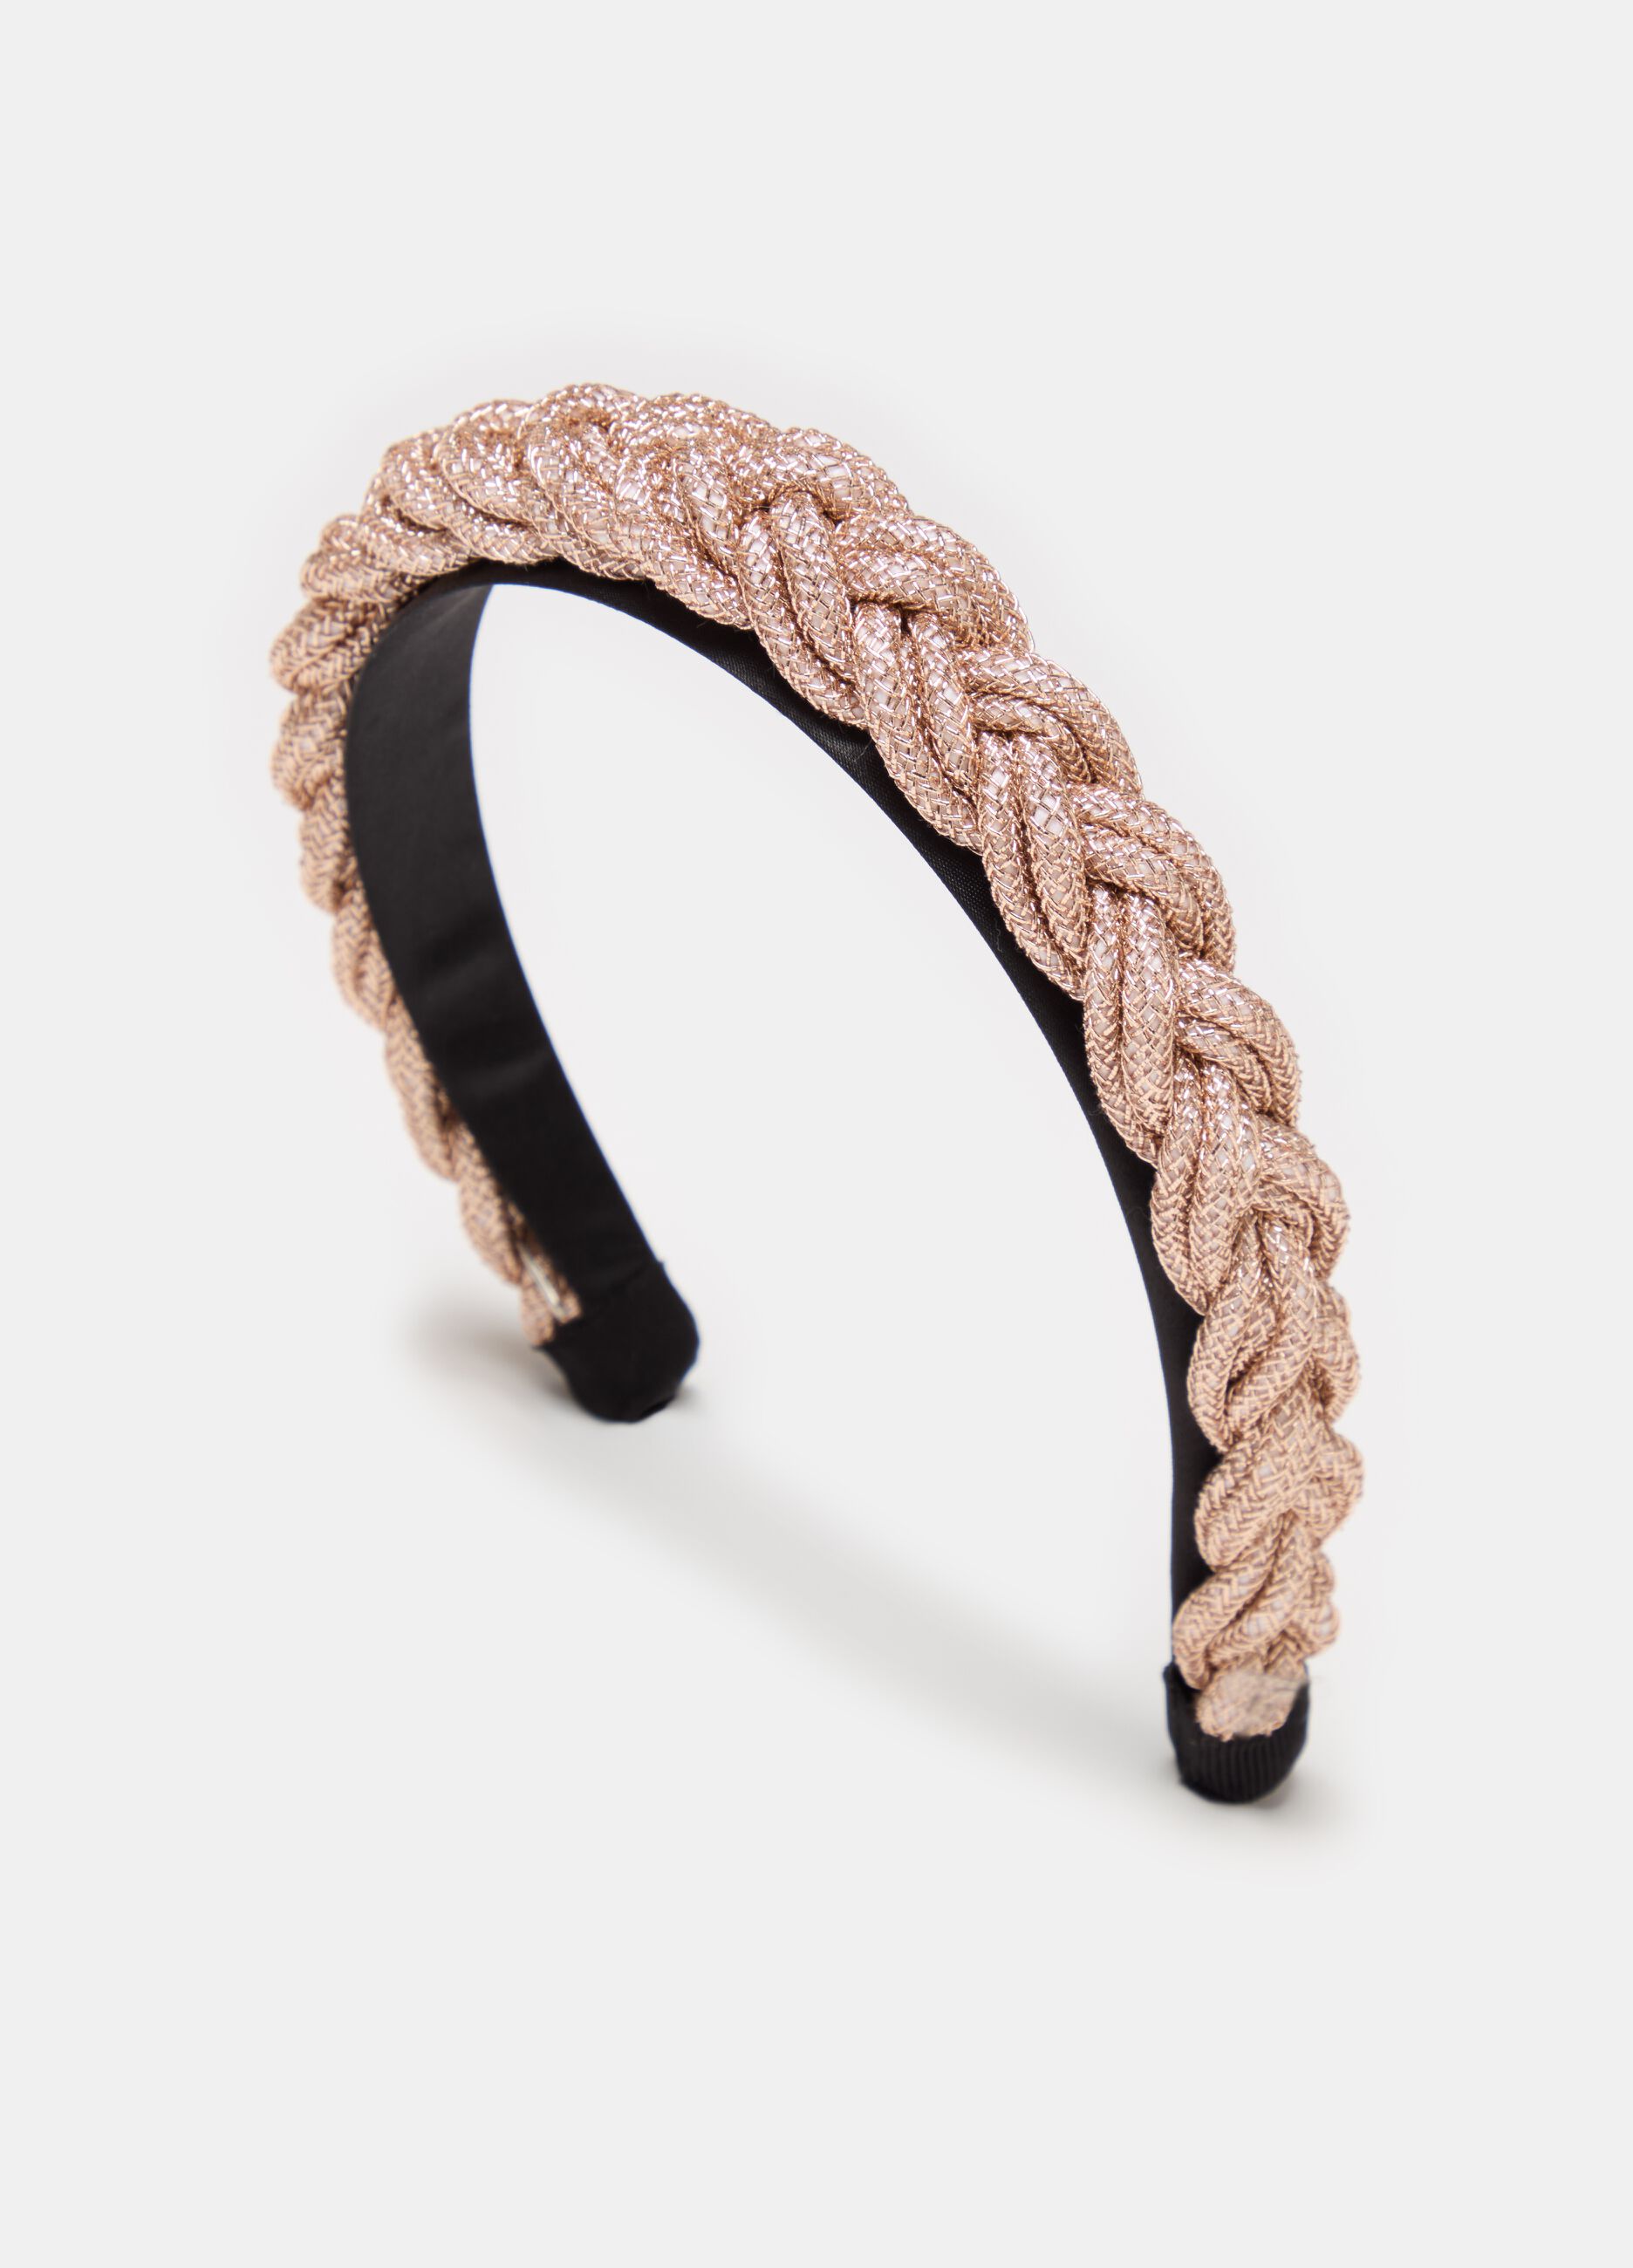 Braided Alice band in lurex